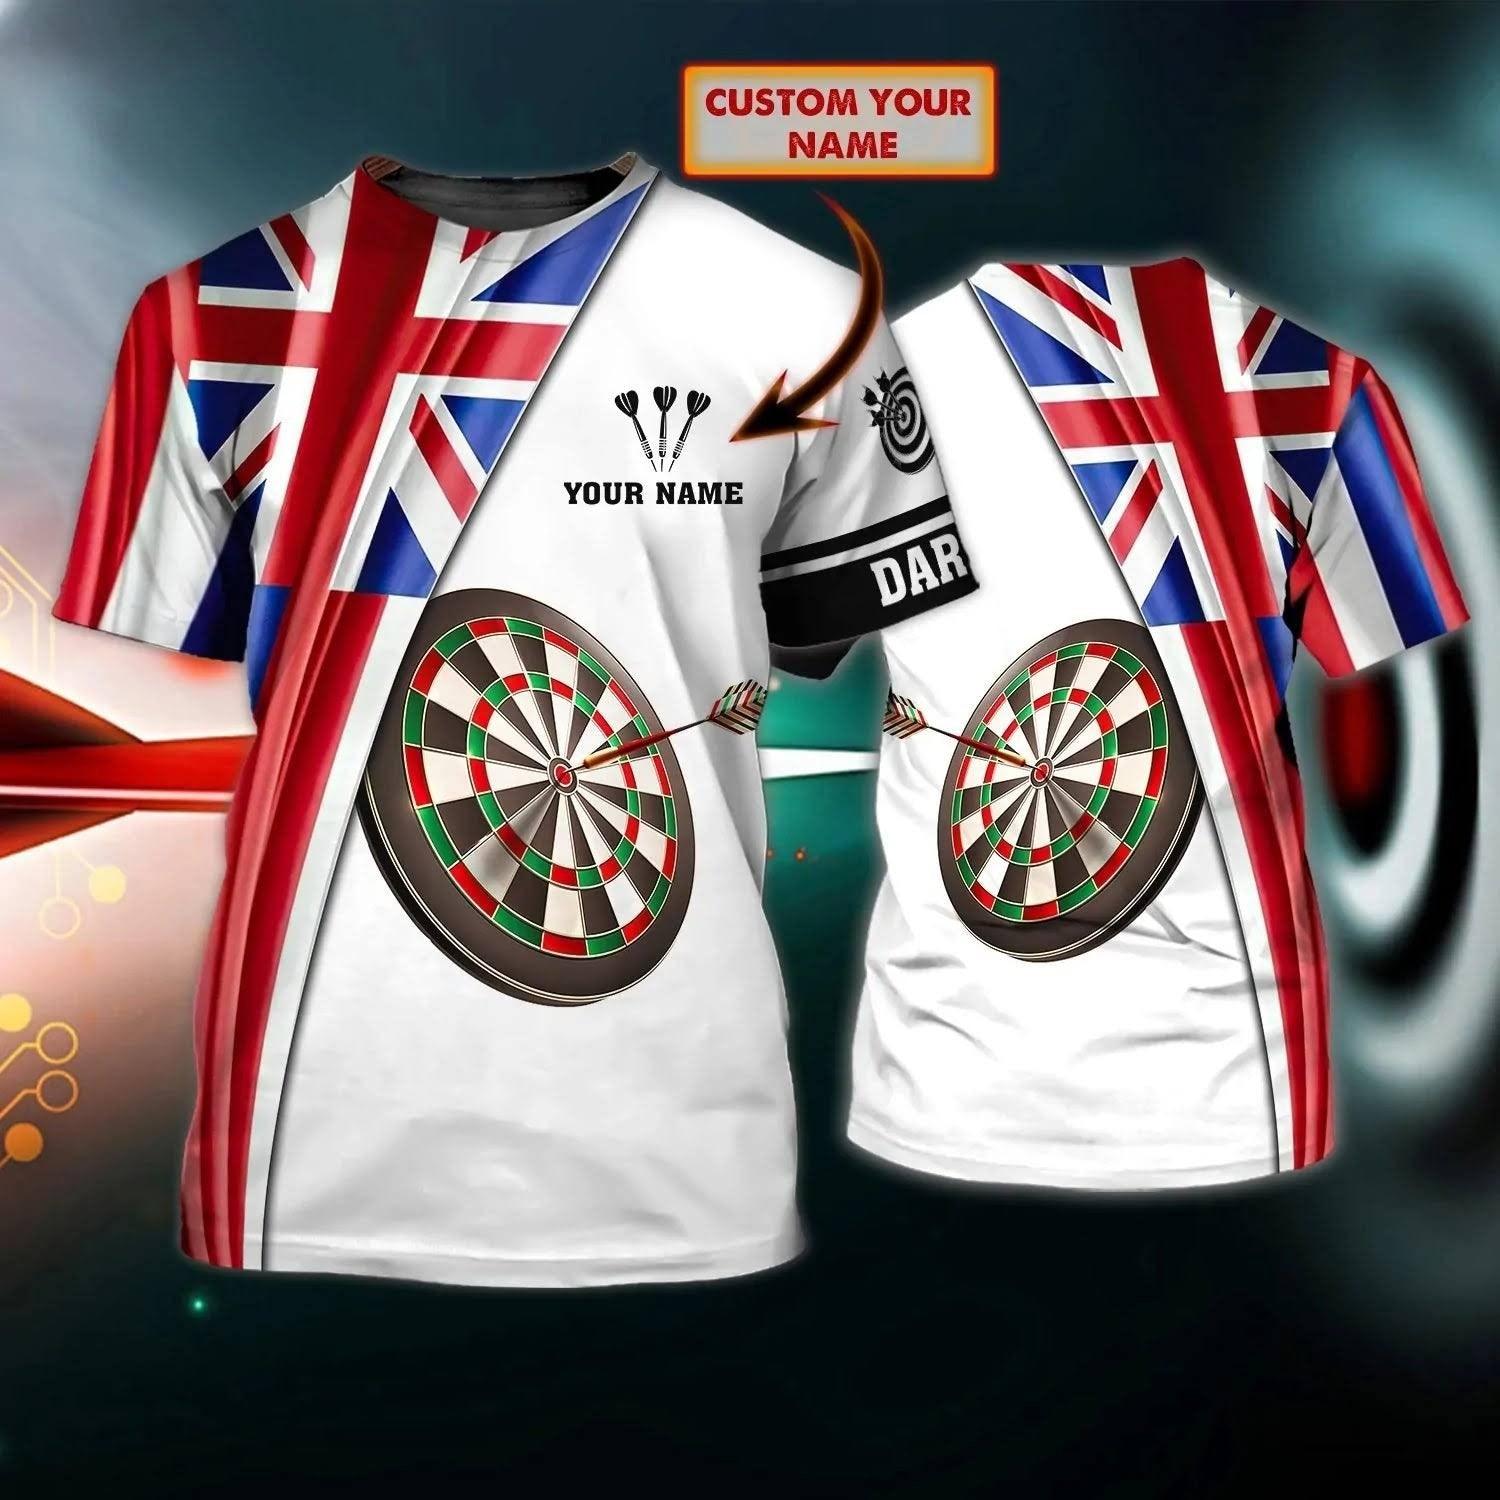 Customized Name Darts T Shirt, Darts UK Flag Personalized Name Bear T Shirt For Men - Perfect Gift For Darts Game Lovers, Darts Players - Amzanimalsgift